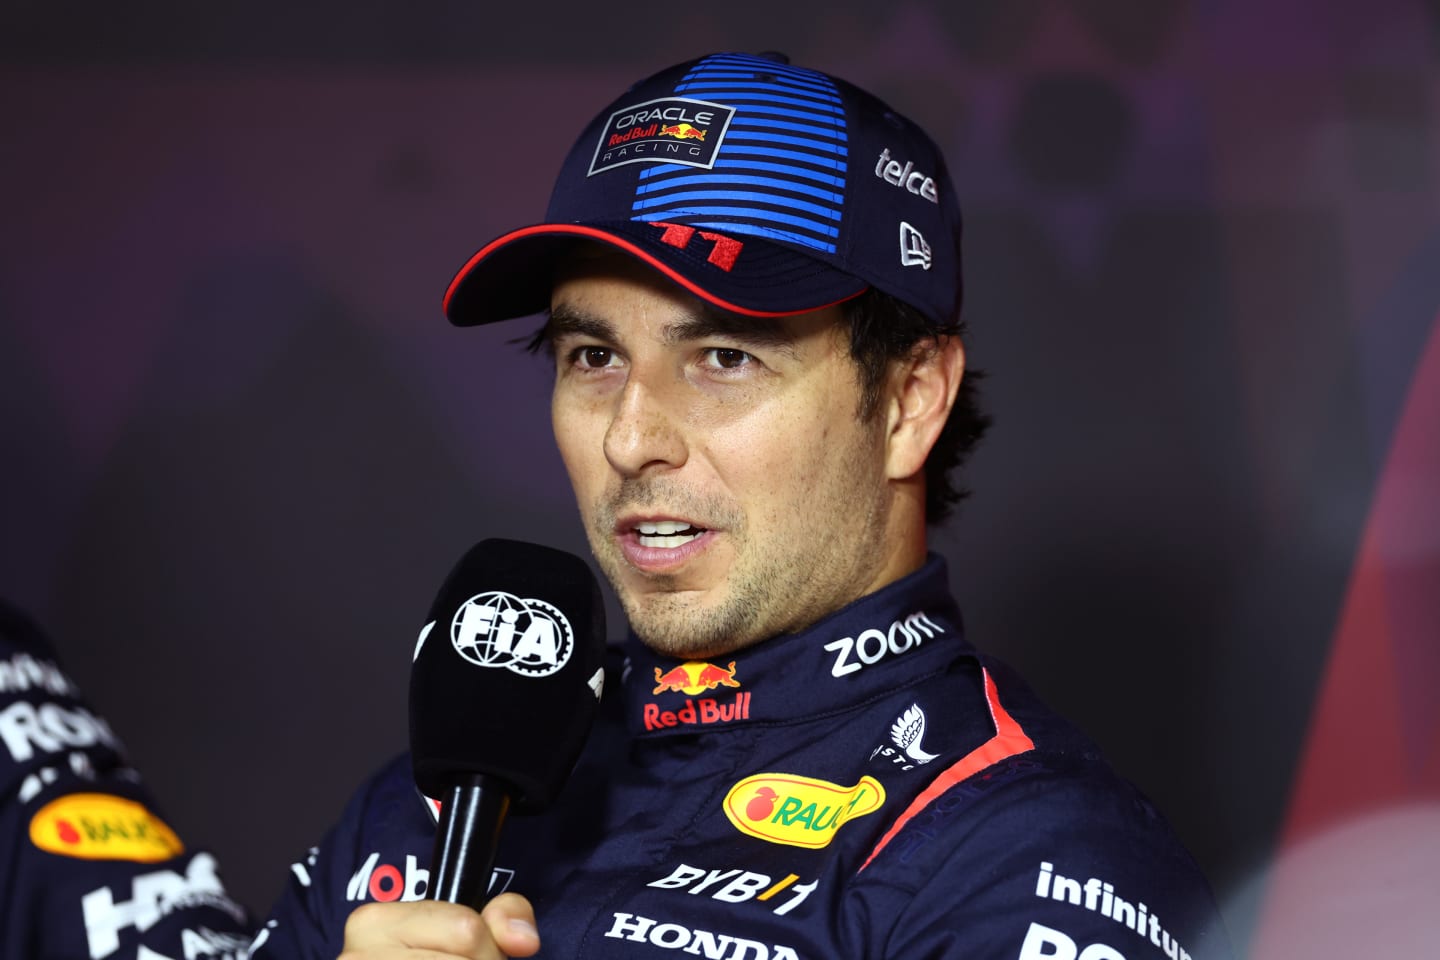 JEDDAH, SAUDI ARABIA - MARCH 08: Third placed qualifier Sergio Perez of Mexico and Oracle Red Bull Racing talks in a press conference after qualifying ahead of the F1 Grand Prix of Saudi Arabia at Jeddah Corniche Circuit on March 08, 2024 in Jeddah, Saudi Arabia. (Photo by Bryn Lennon/Getty Images)